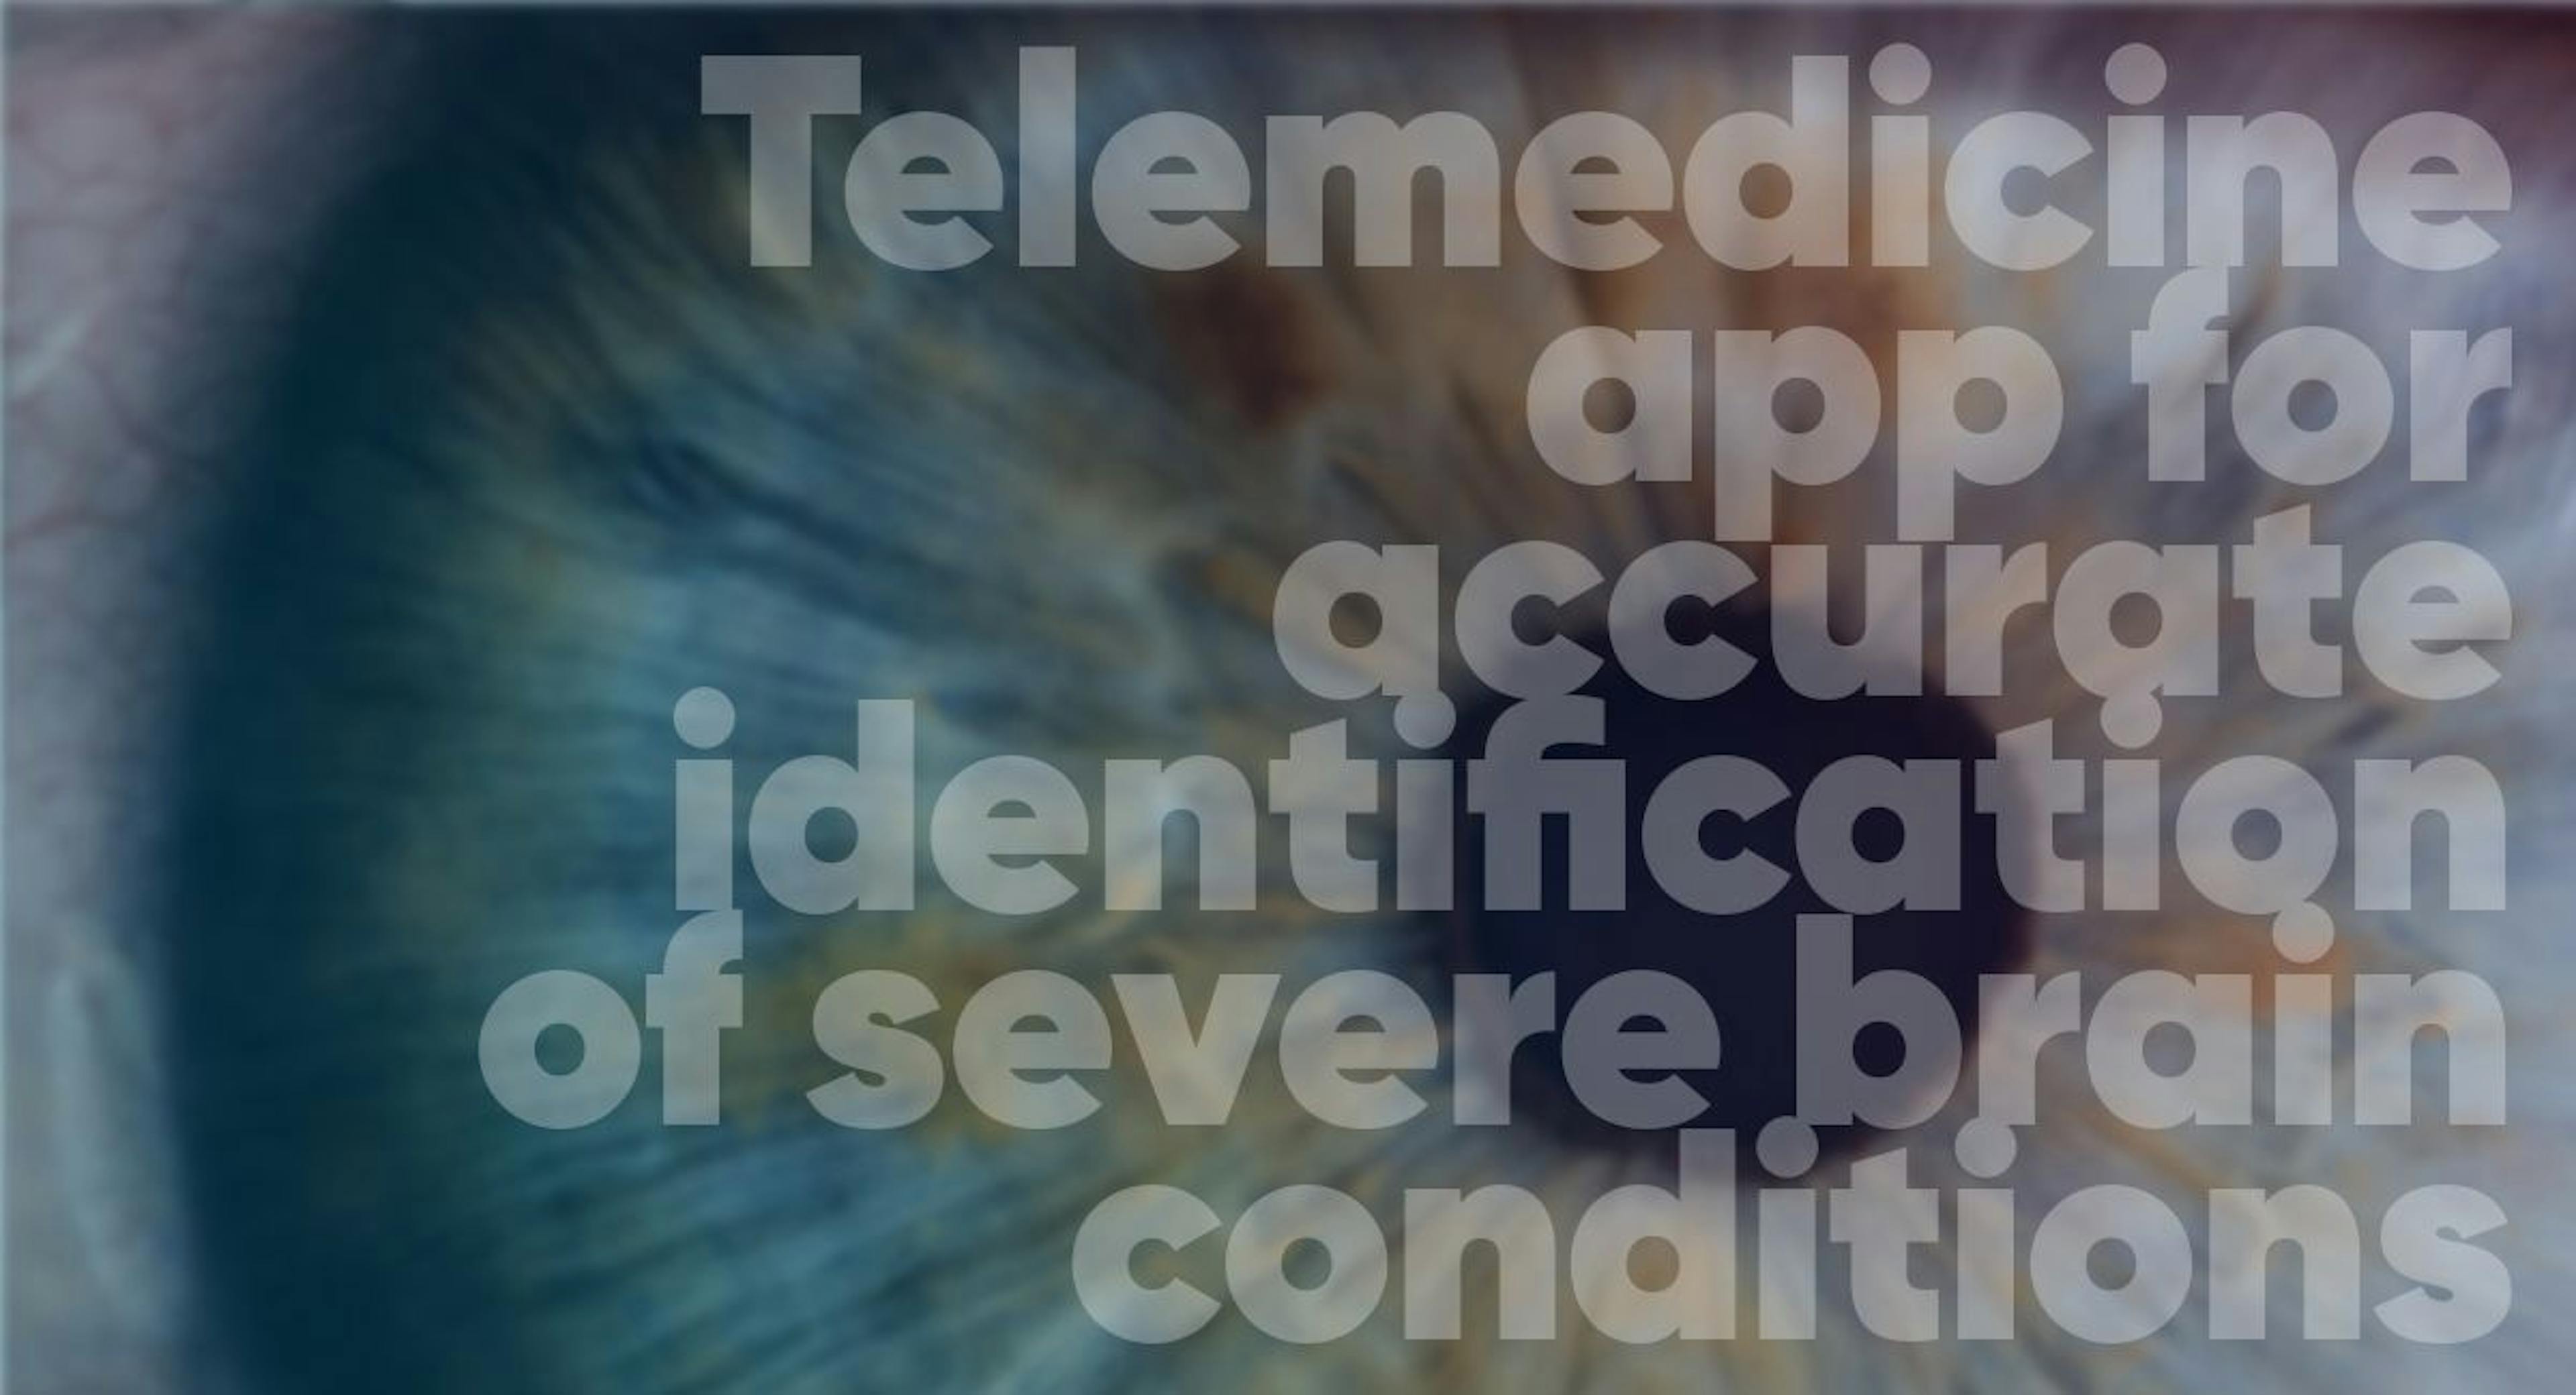 featured image - Telemedicine App For More Accurate Identification of Severe Brain Conditions